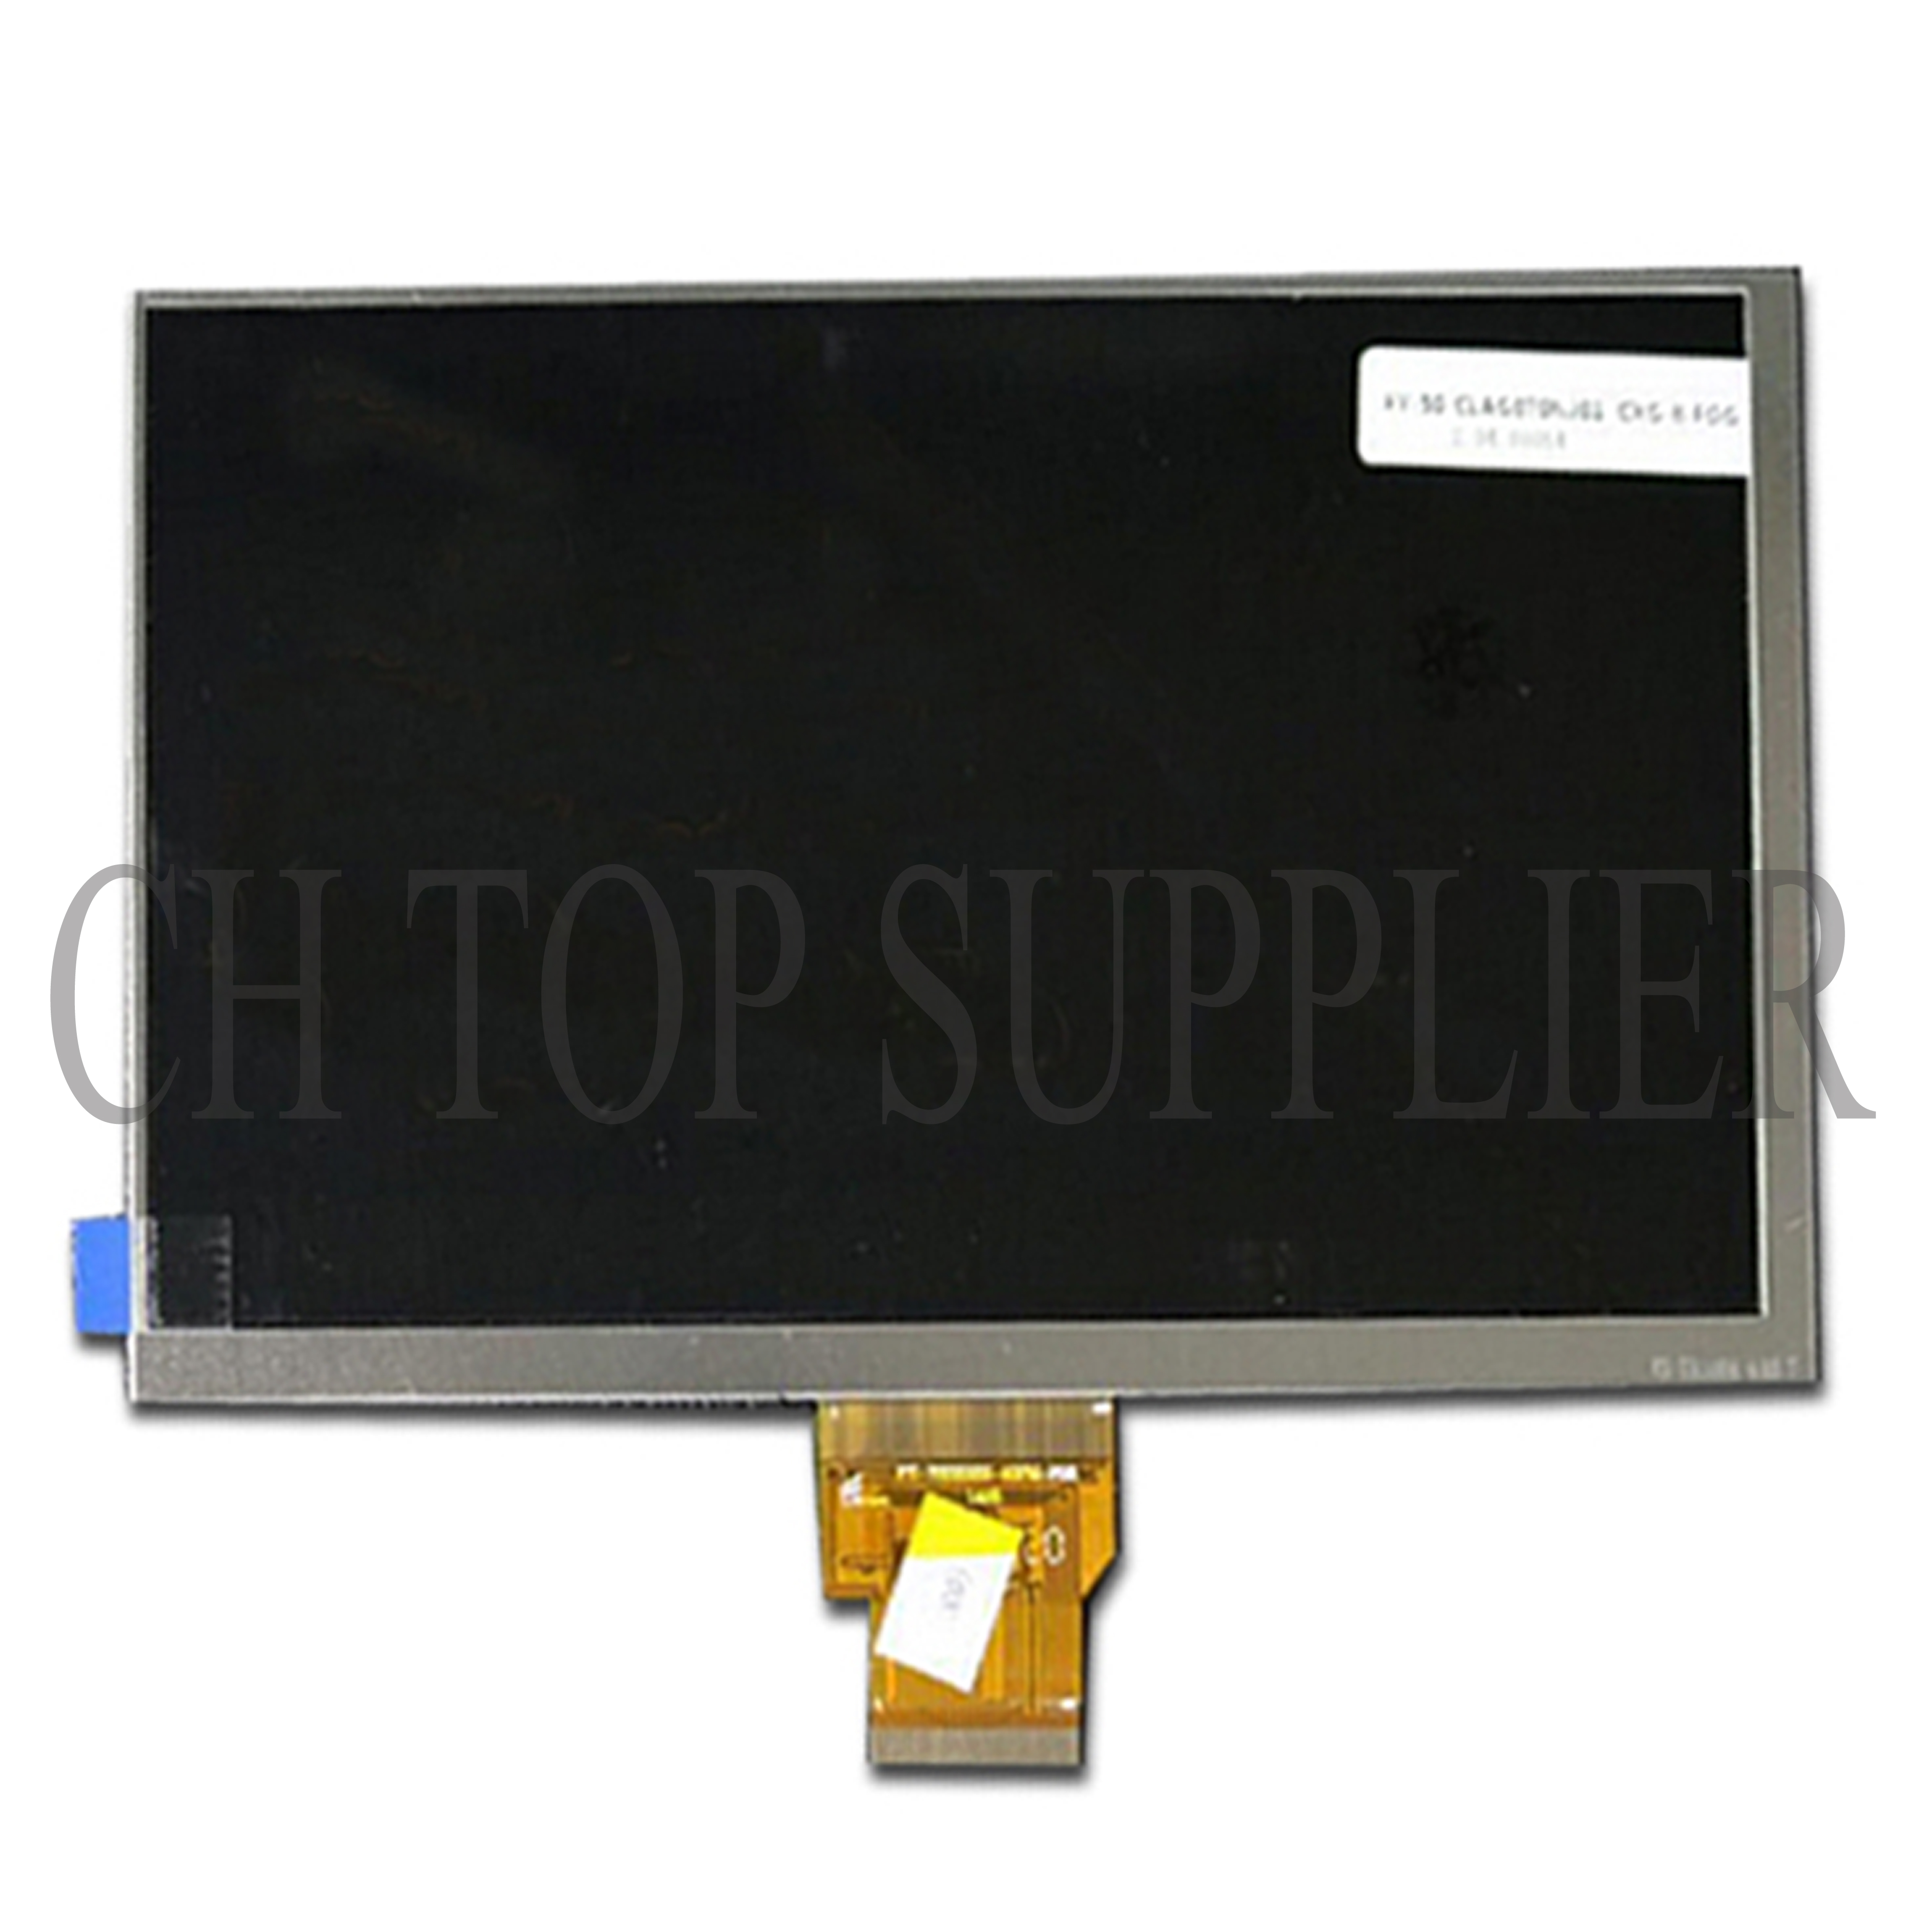 New LCD Display FY07024DI26A116-1-FPC1-B For 7.0" inch Tablet IPS inner LCD screen Matrix panel Glass Module Free Shipping